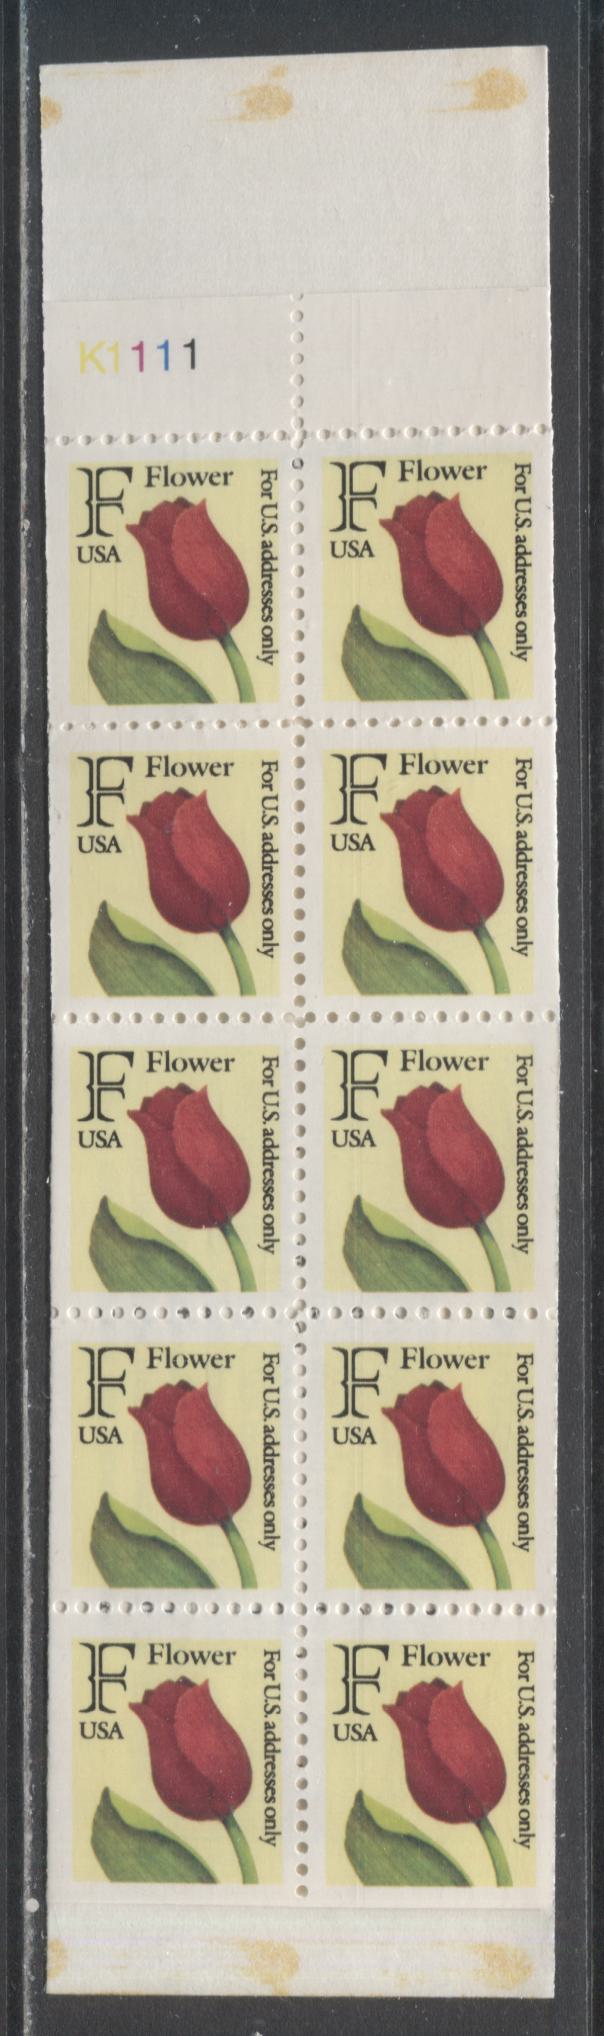 Lot 80 United States SC#2520a F Series Multicolored 1991 Flowers Issue, A VFNH Booklet Of 10, Click on Listing to See ALL Pictures, 2017 Scott Cat. $18